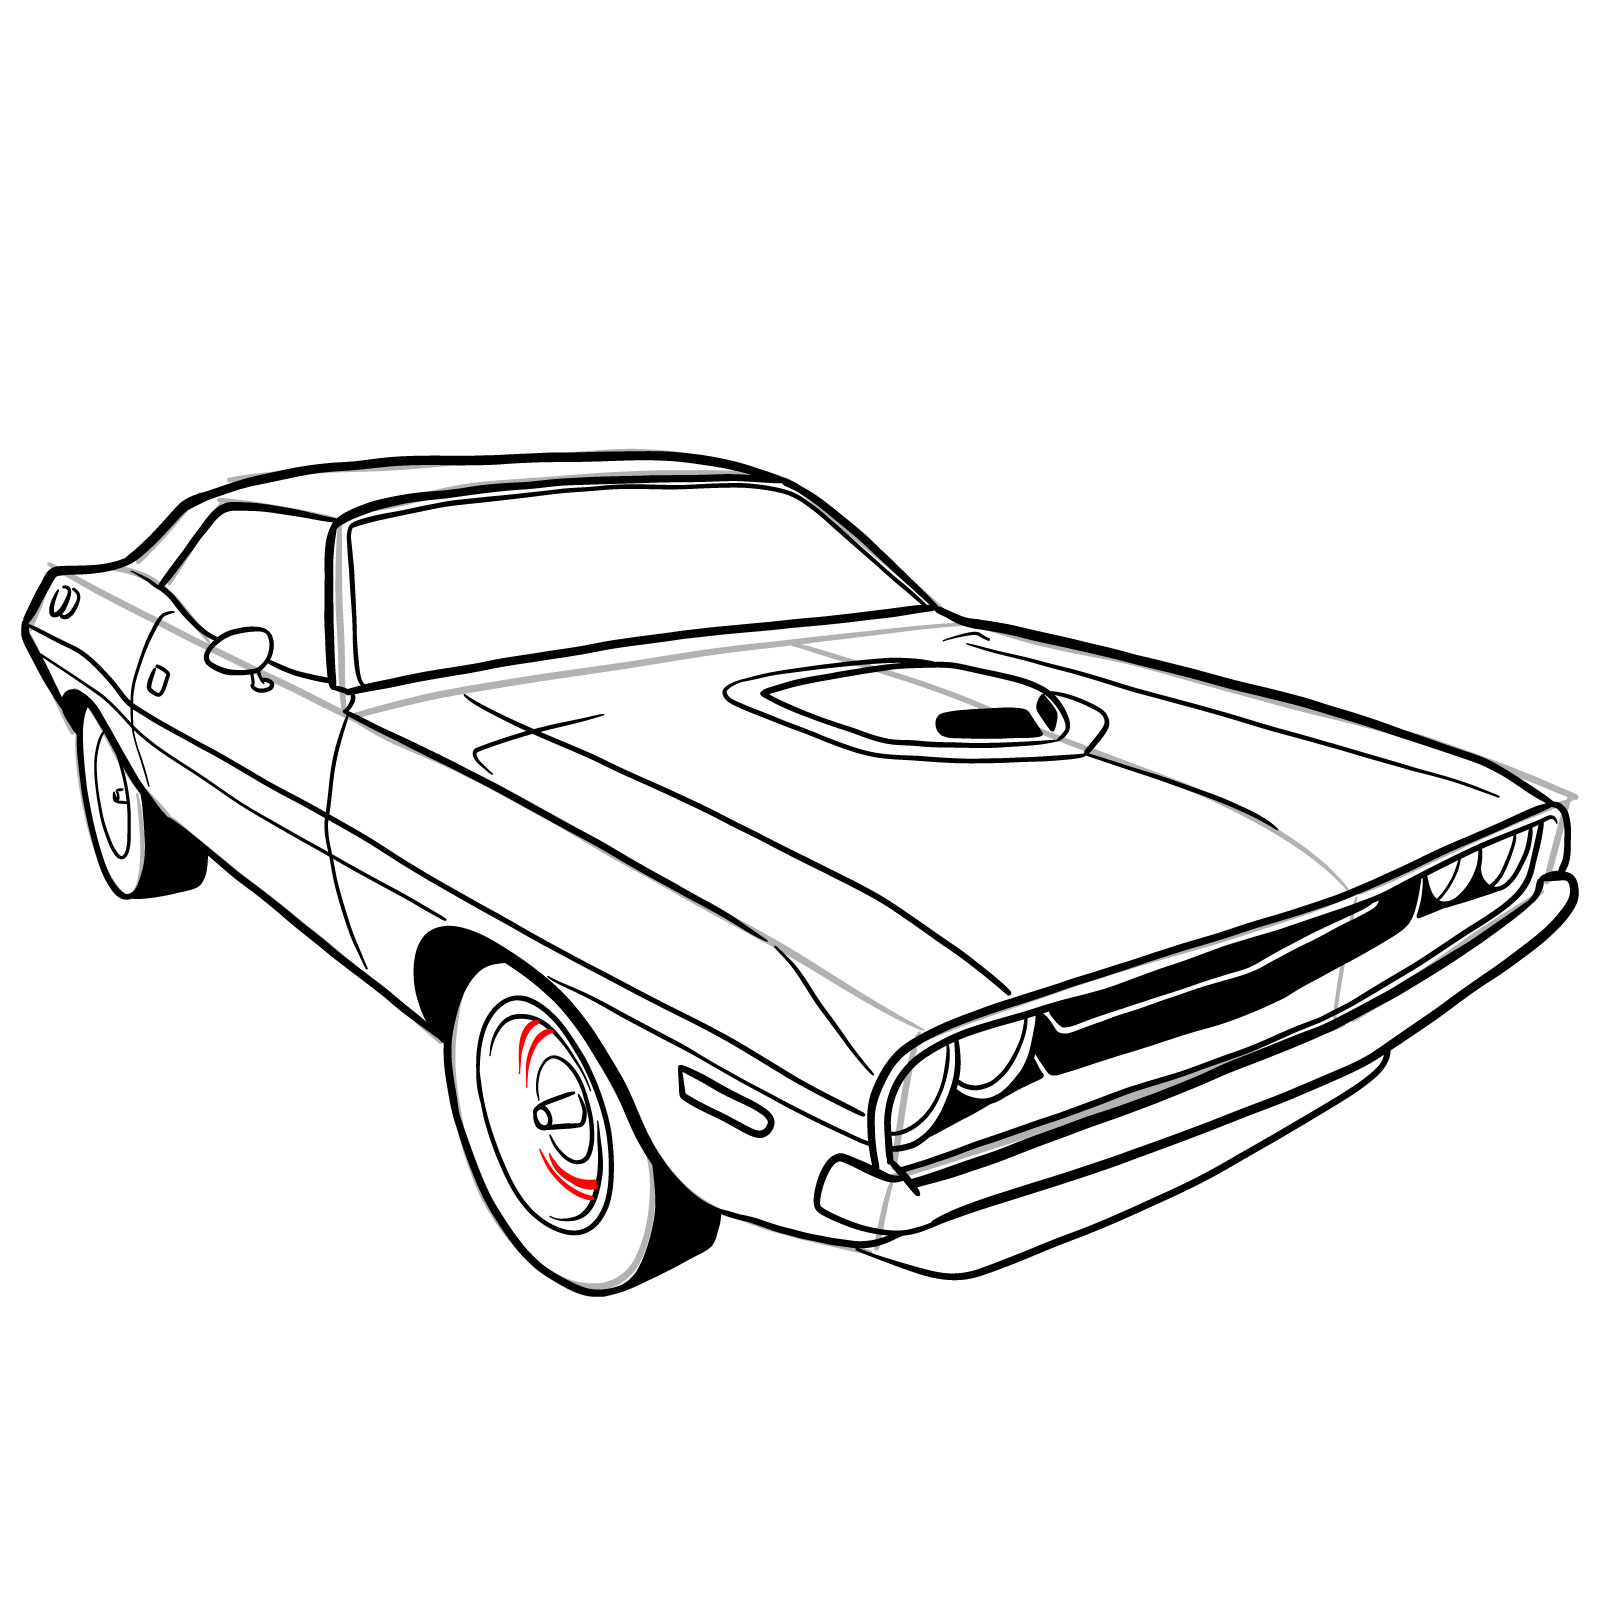 How to draw Dodge Challenger 1970 - step 34